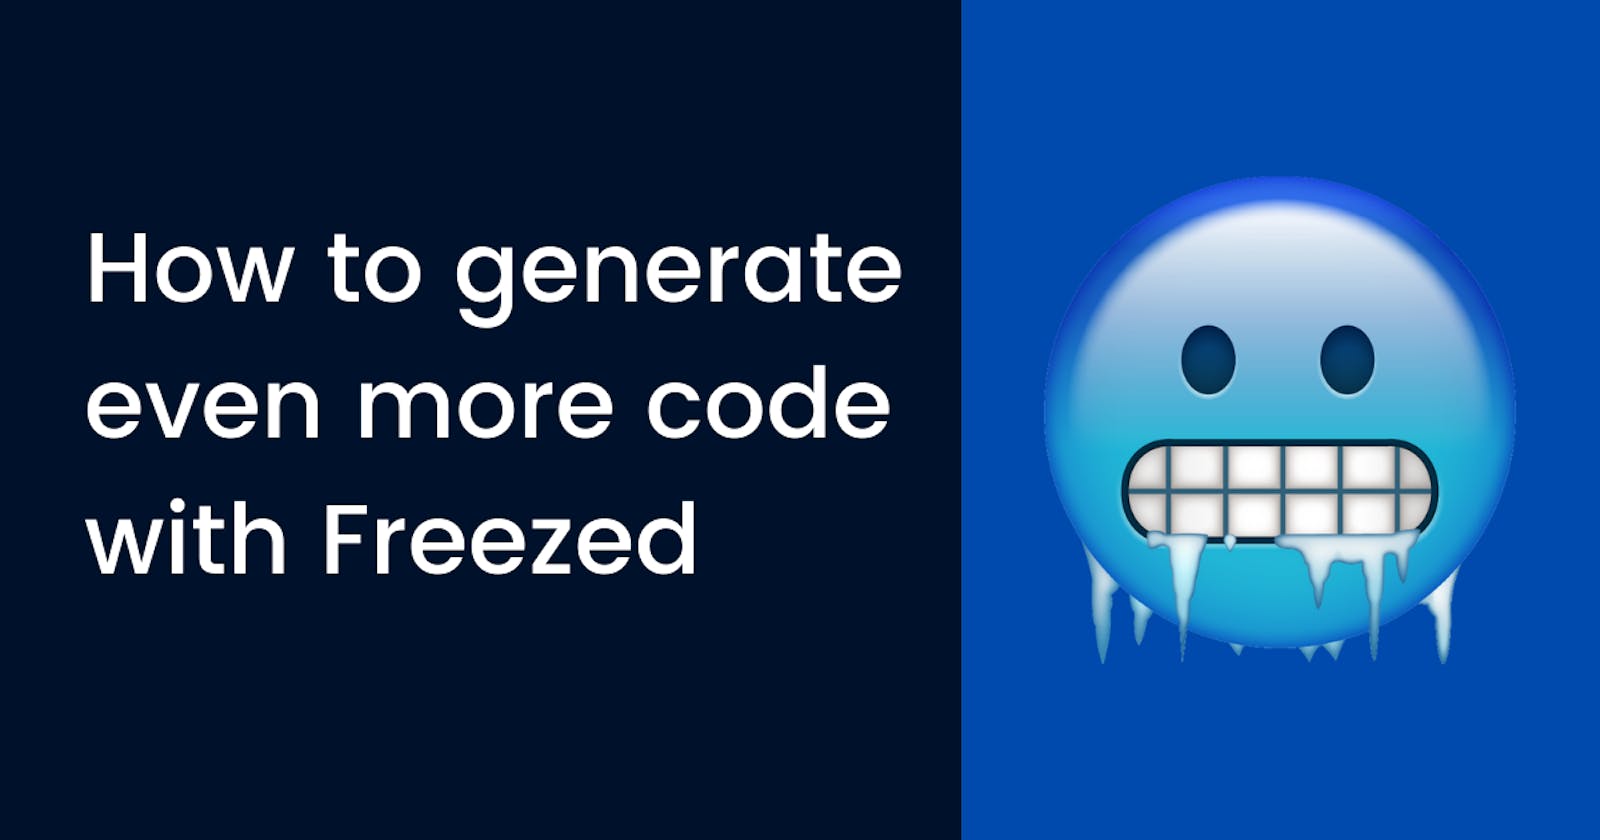 Freezed, or even more code generation